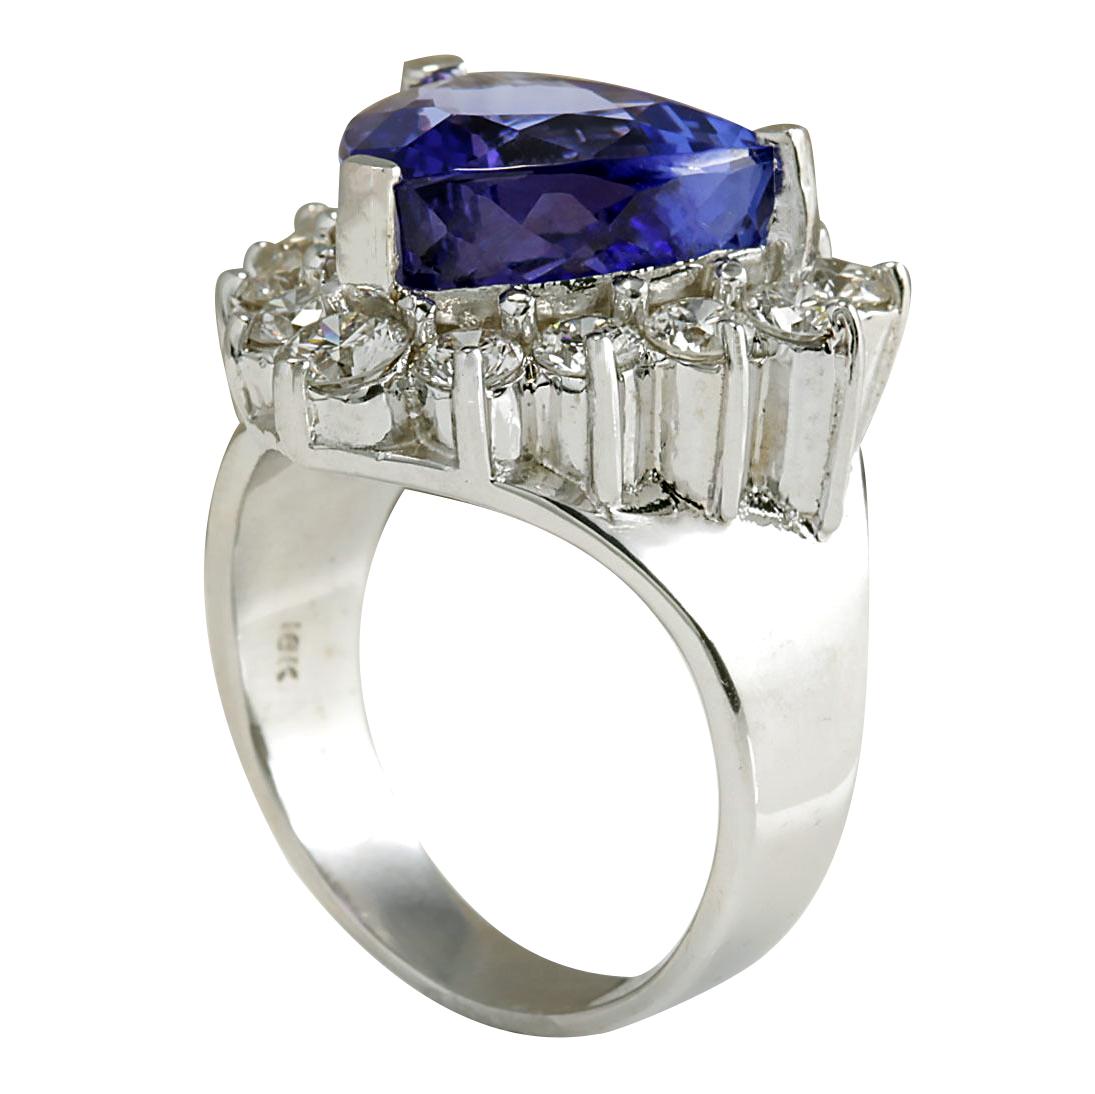 Stamped: 14K White Gold
Total Ring Weight: 12.5 Grams
Total Natural Tanzanite Weight is 9.55 Carat (Measures: 12.50x12.50 mm)
Color: Blue
Total Natural Diamond Weight is 1.66 Carat
Color: F-G, Clarity: VS2-SI1
Face Measures: 20.00x20.00 mm
Sku: